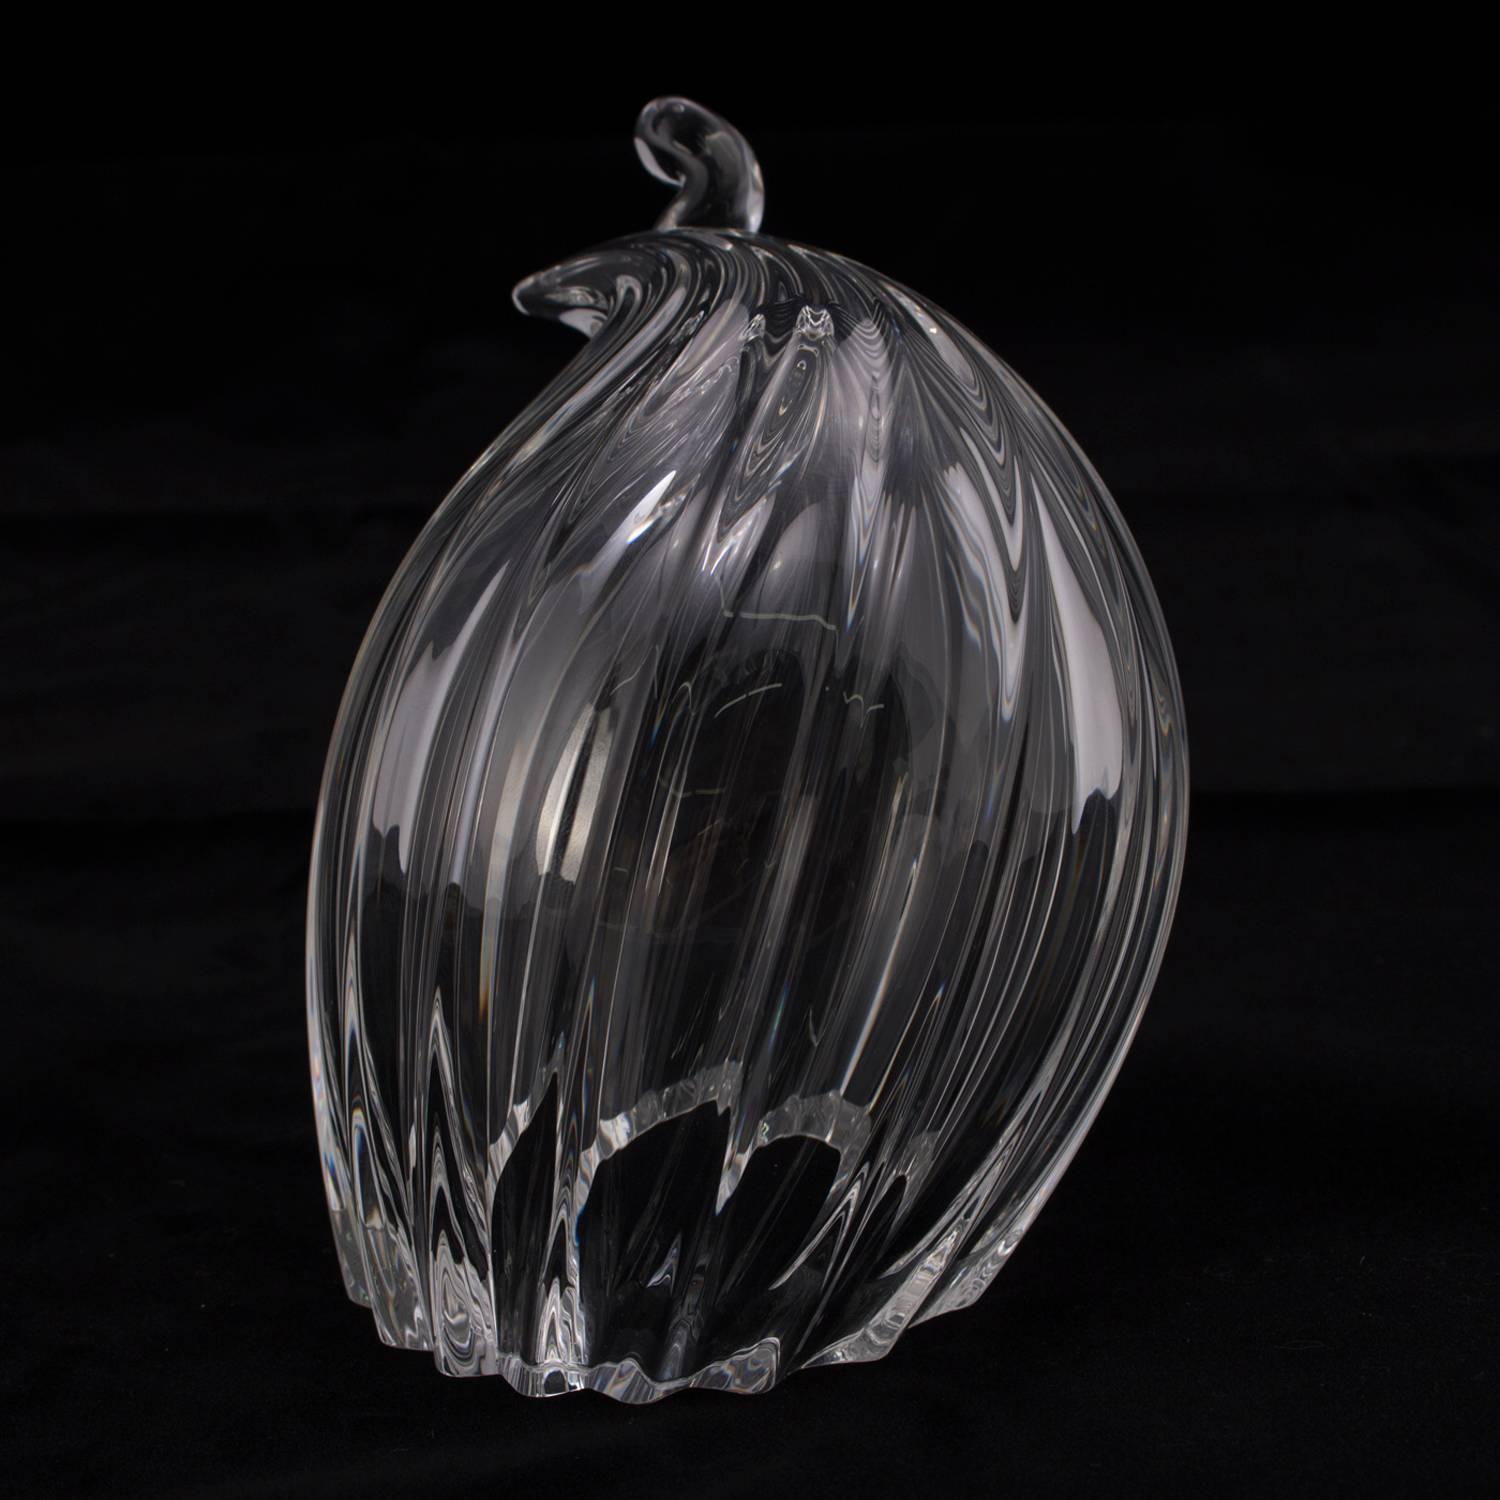 20th Century Figural Steuben Crystal Quail Sculptural Paperweight by Pollard, Signed